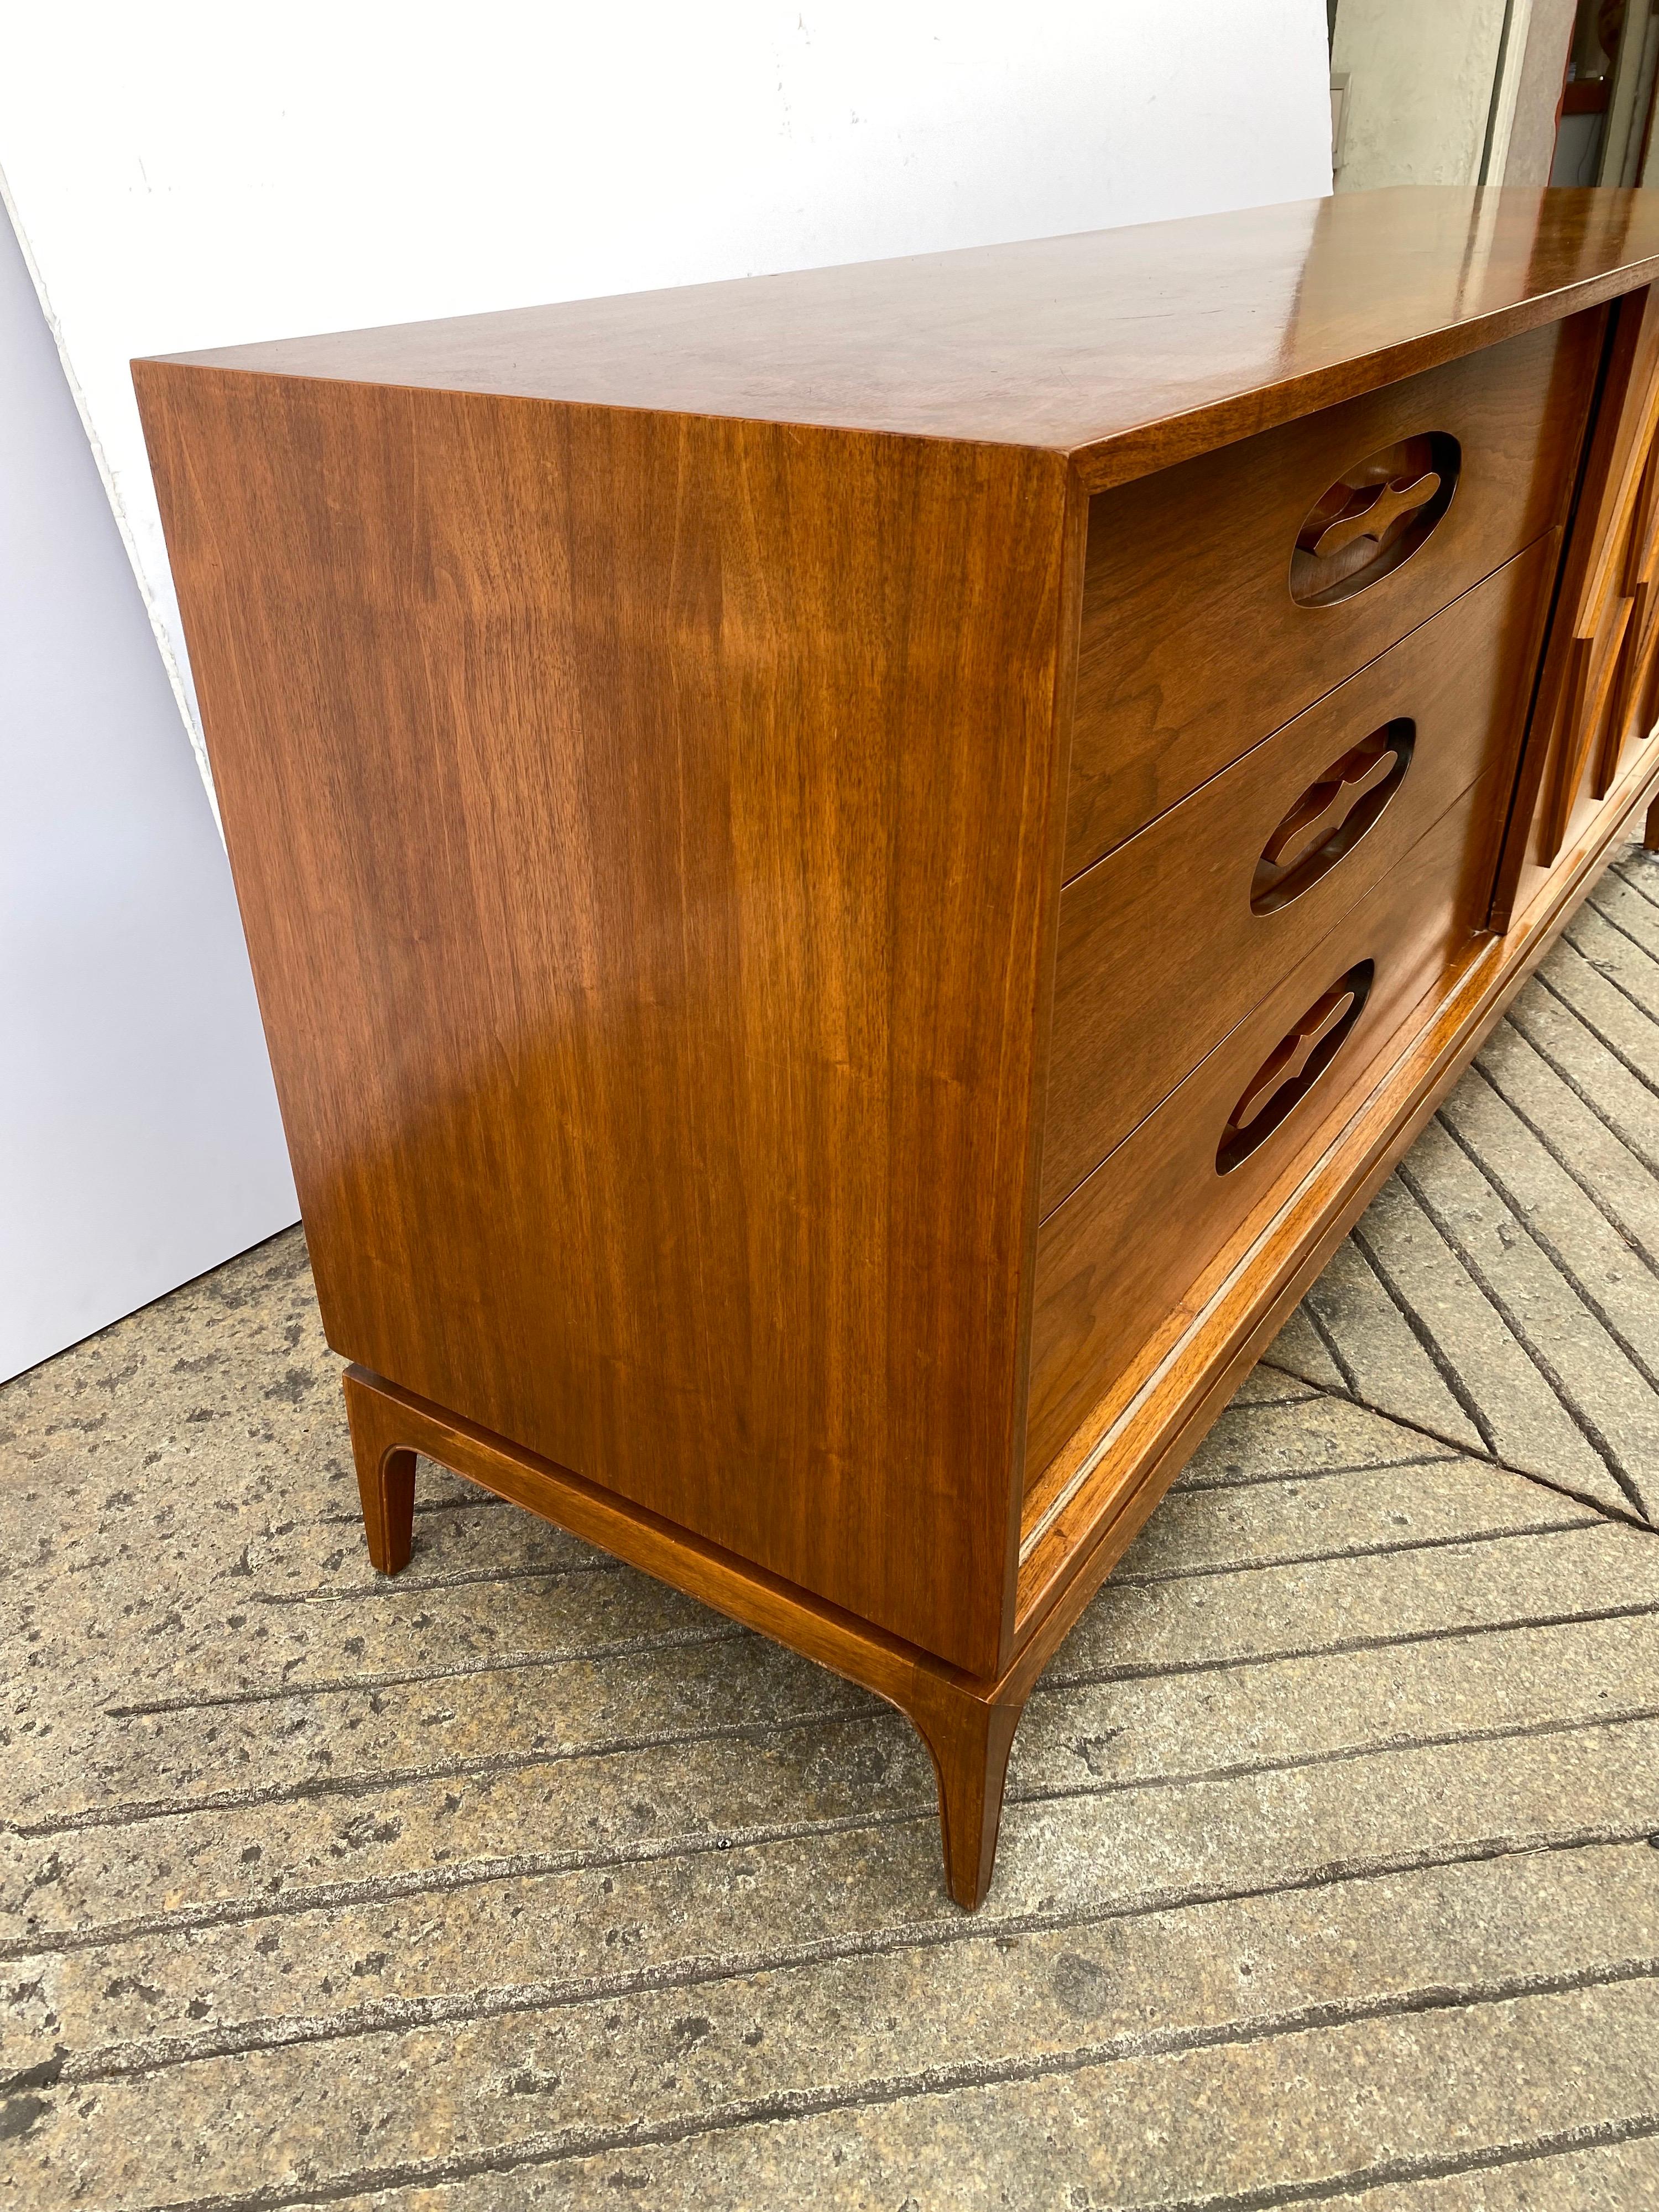 Young Manufacturing walnut 6 drawer dresser or credenza. Tons of Storage with a Sliding Door. Drawers are nice size and scale, all work very well. Unique recessed area around drawer handles. Diamond pattern design on door. All Original! Shows minor